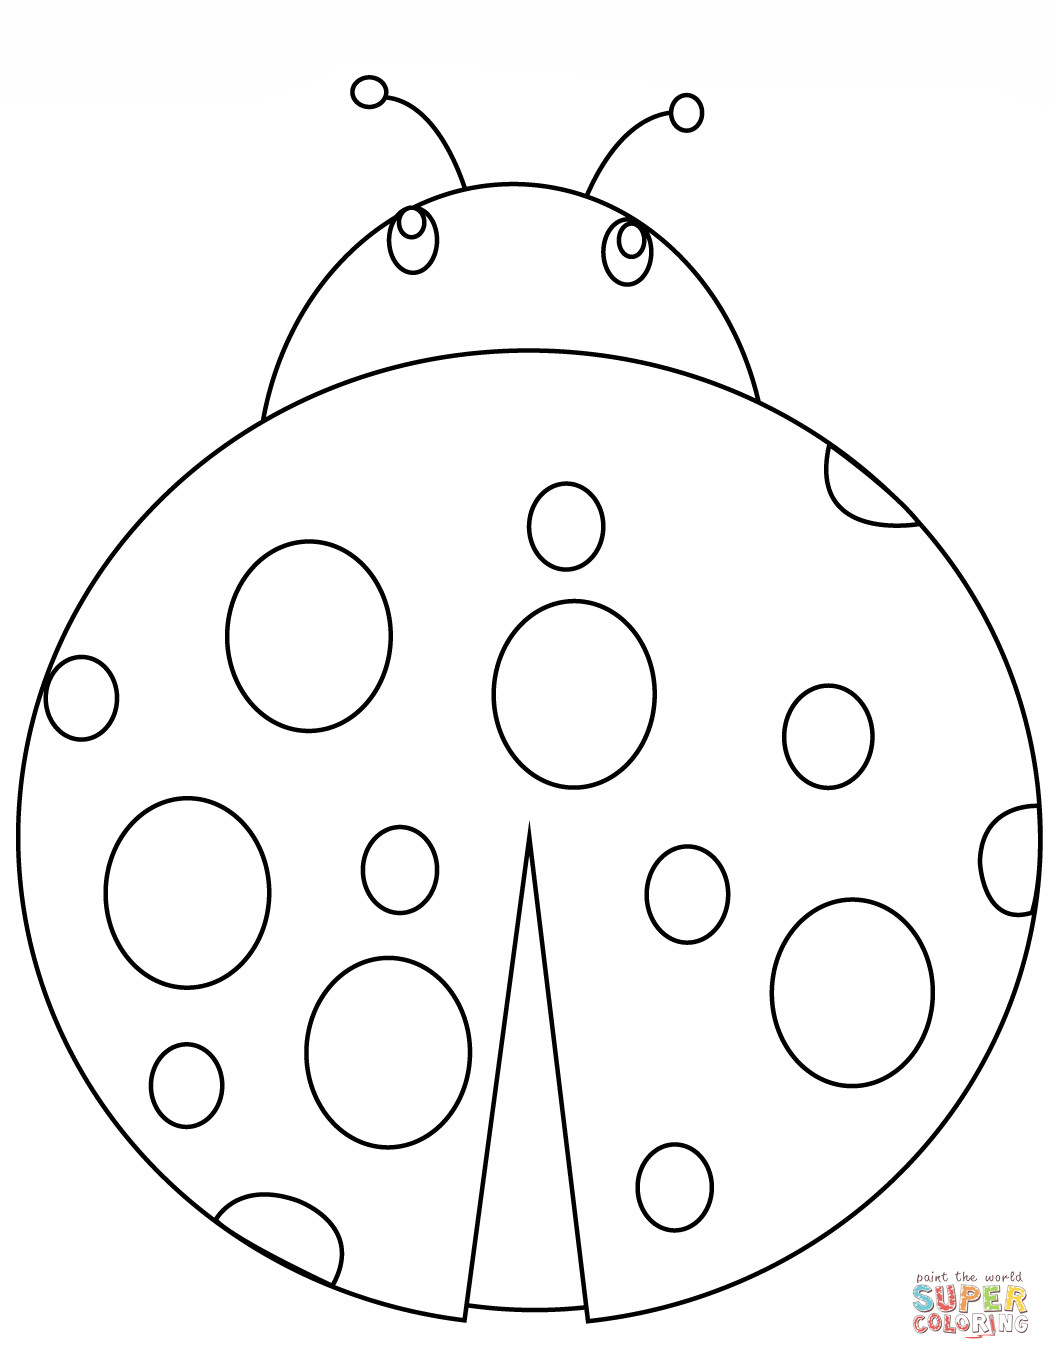 Free Printable Ladybug Coloring Pages at GetColorings.com | Free ...